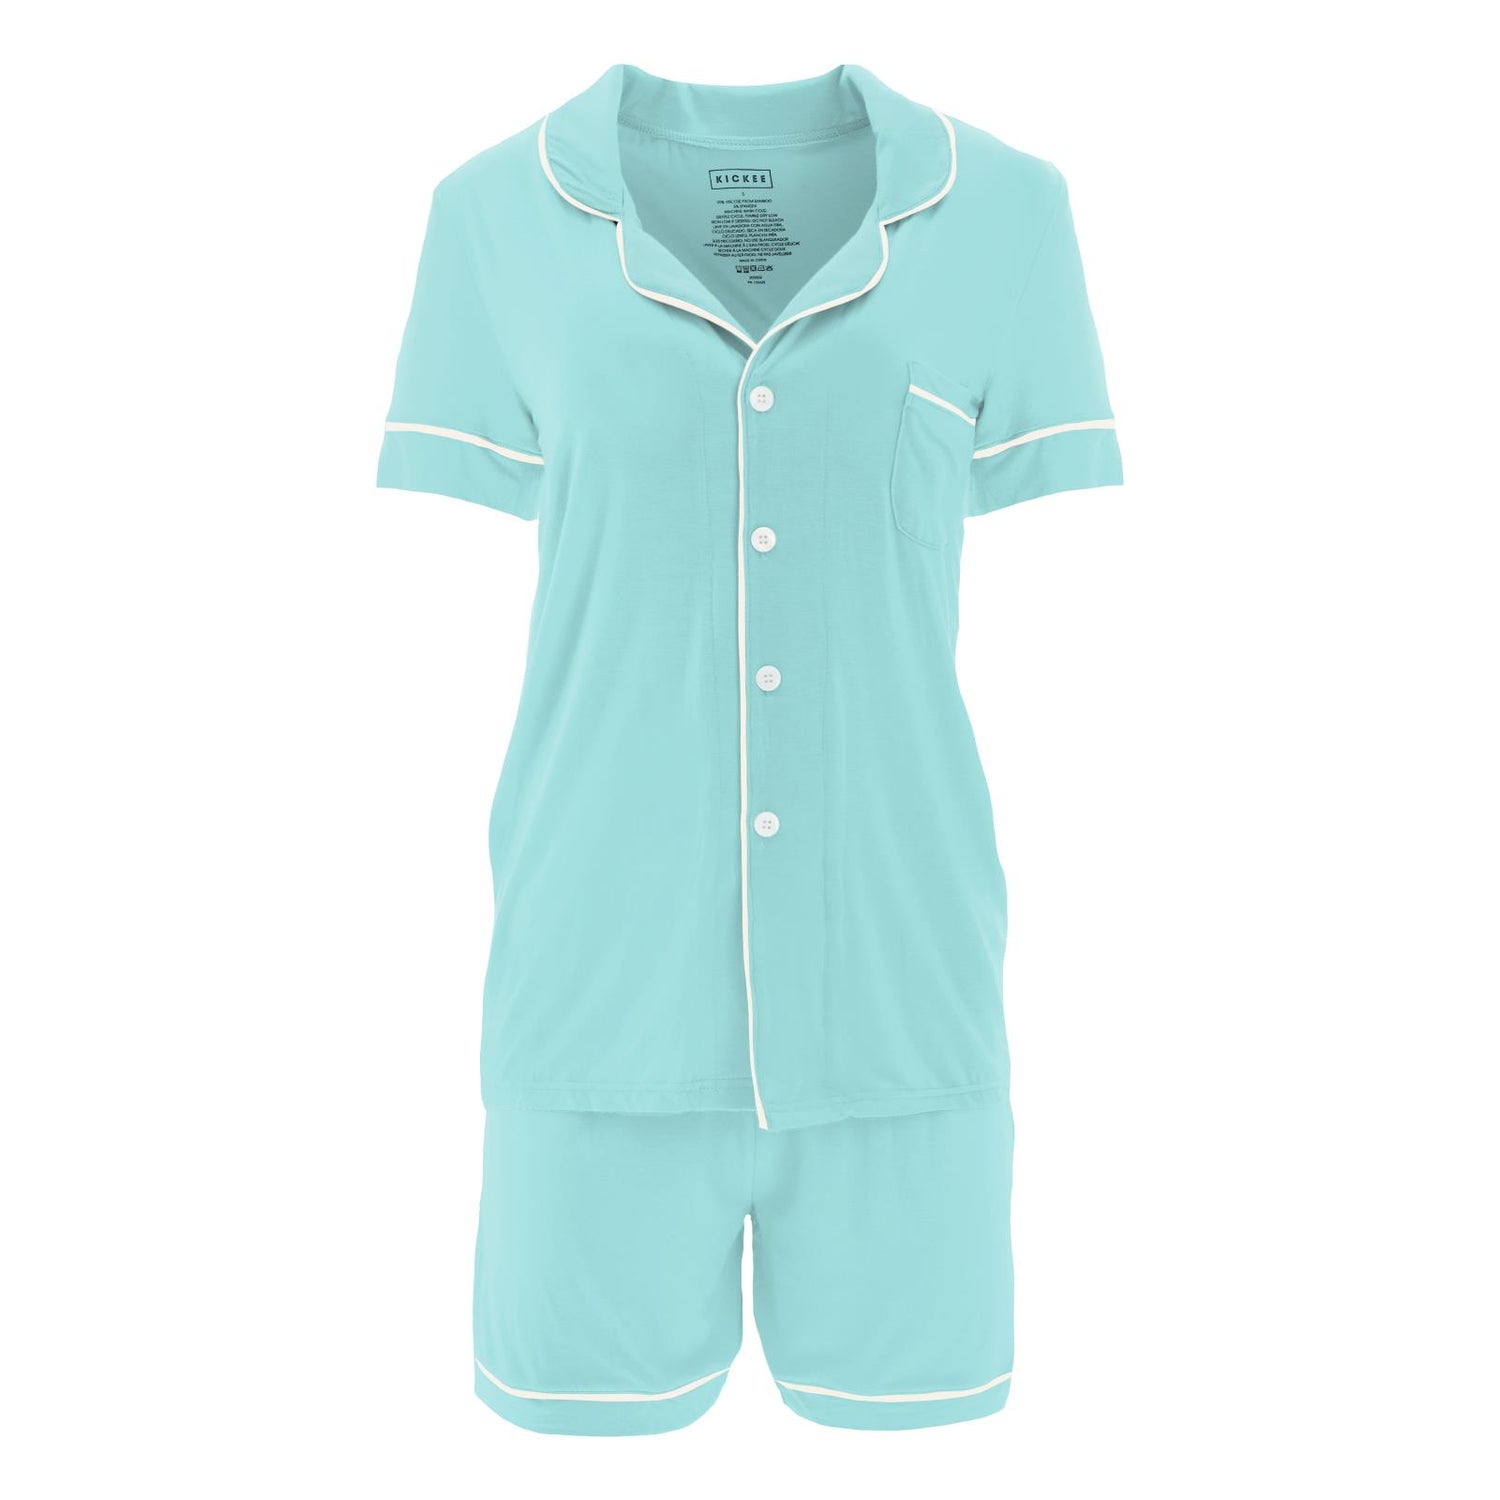 Women's Short Sleeve Collared Pajama Set with Shorts in Summer Sky with Natural